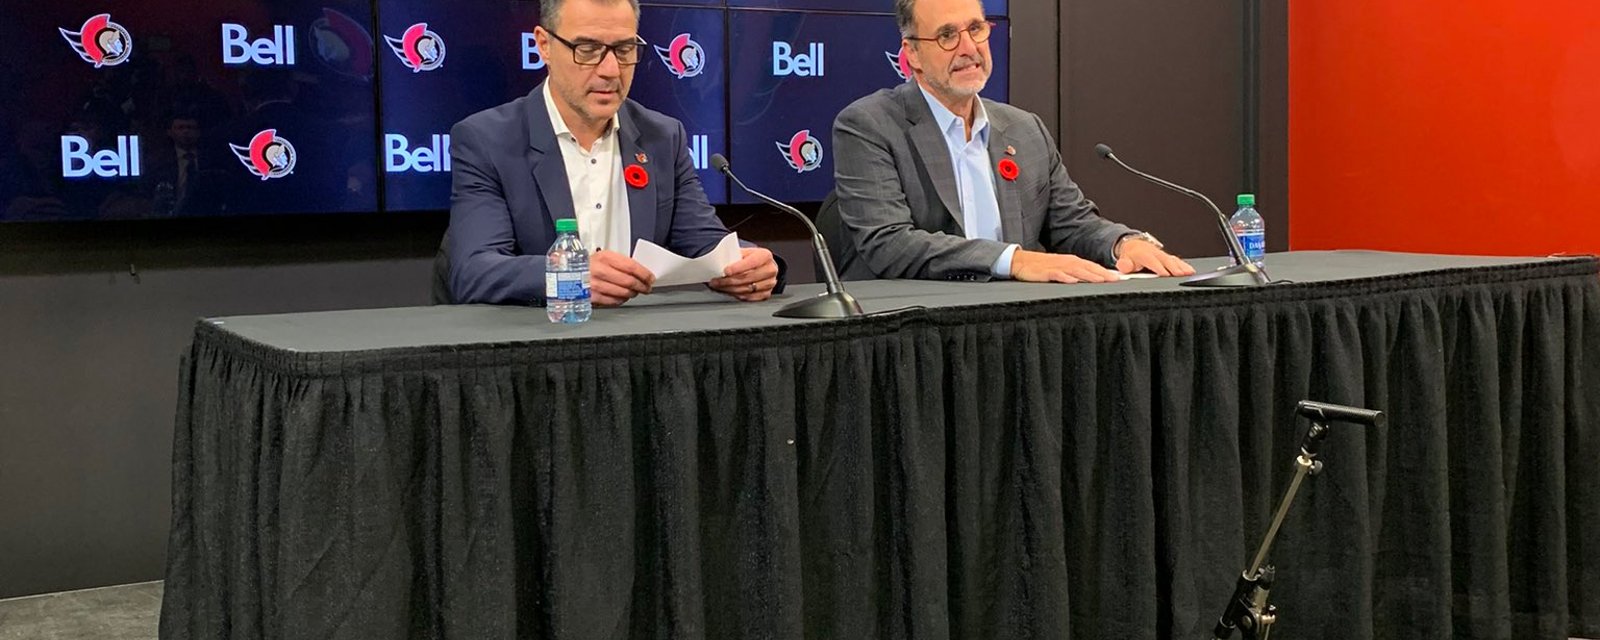 Significant turnaround in Peter Dorion’s departure in Ottawa in brutal press conference